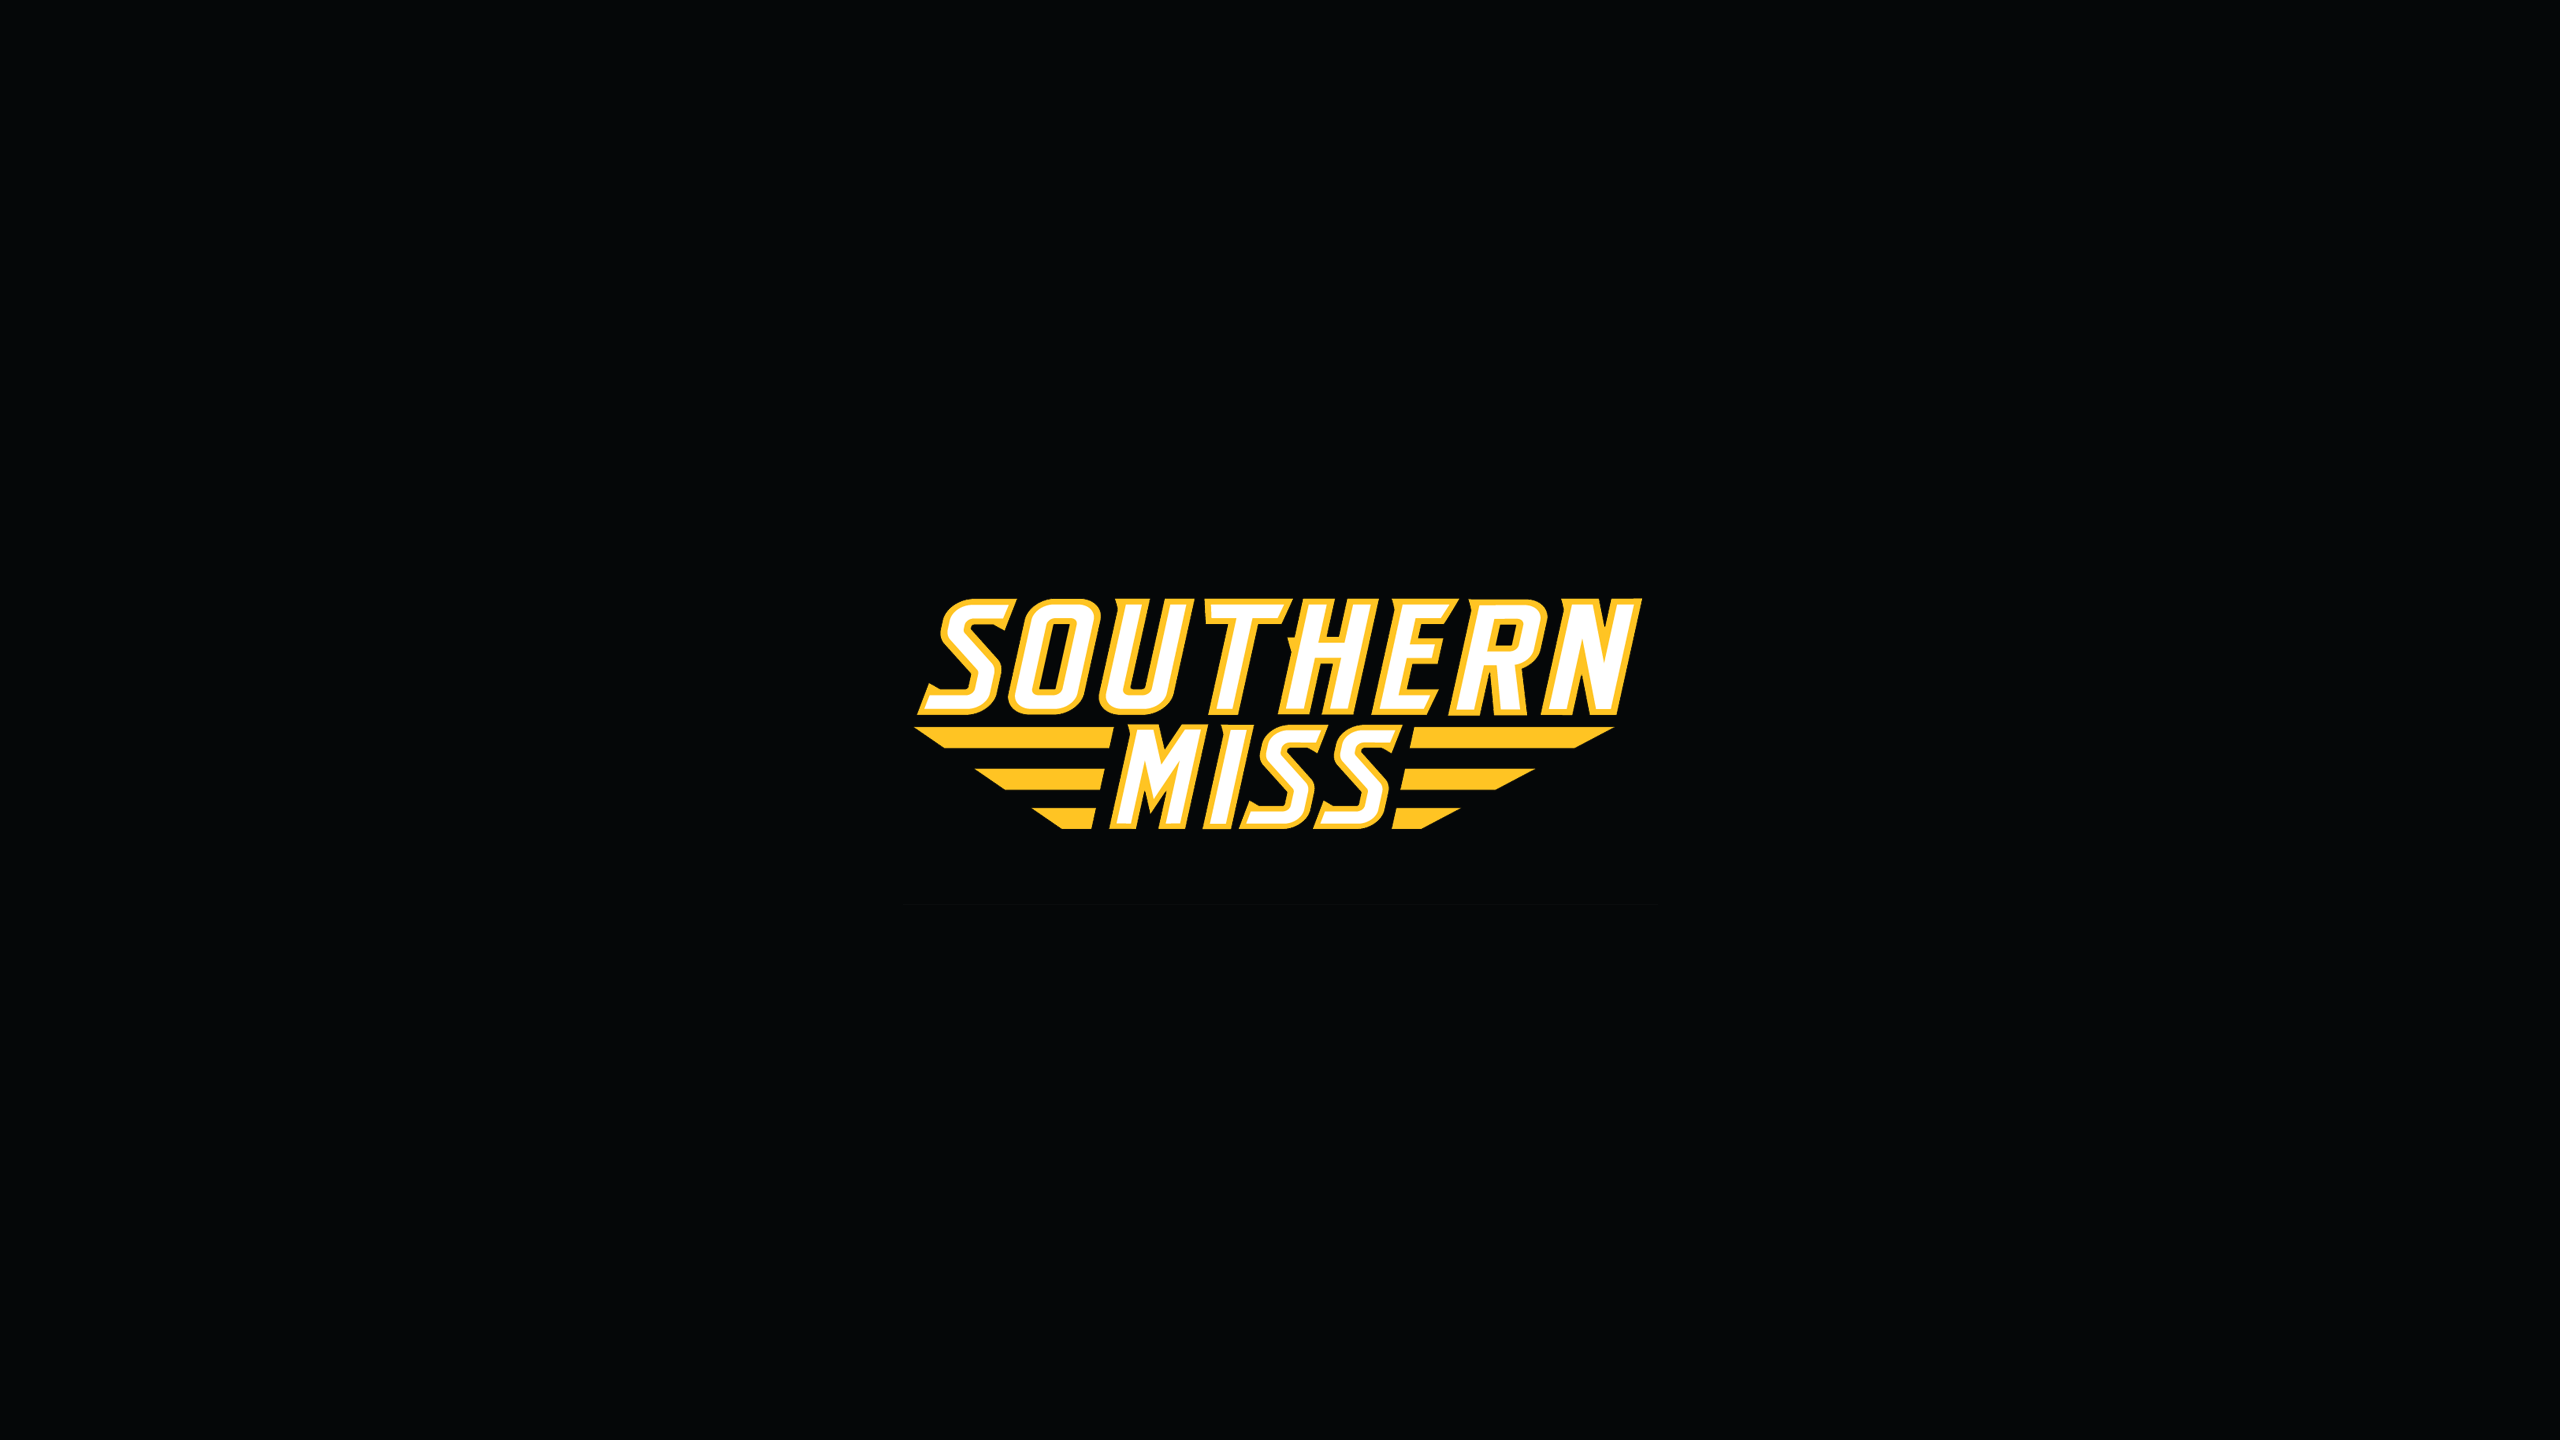 Southern Miss Golden Eagles Football - NCAAF - Square Bettor